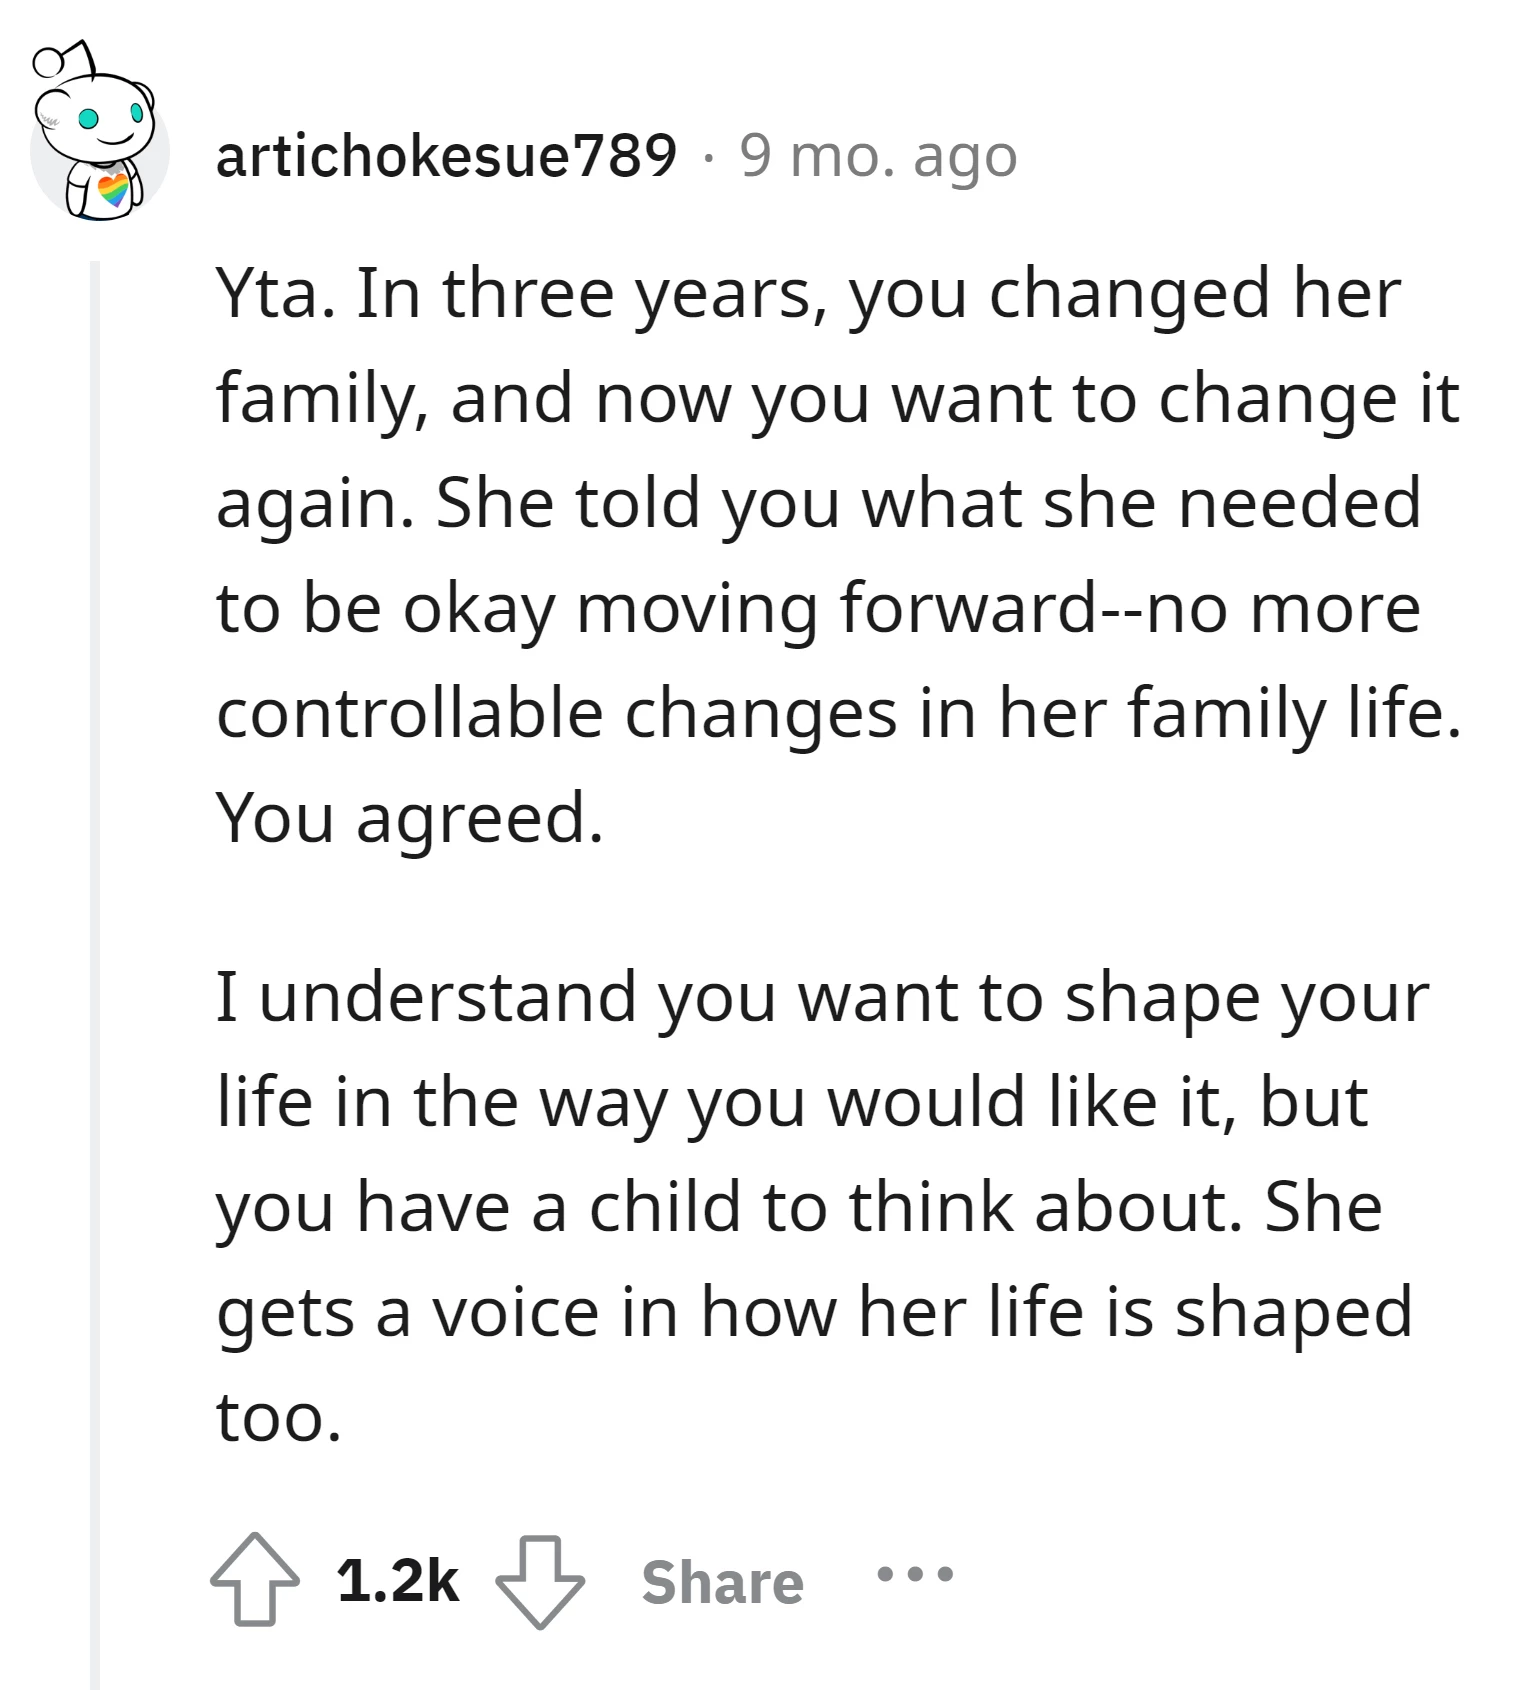 OP was wrong for disregarding the daughter's need for stability